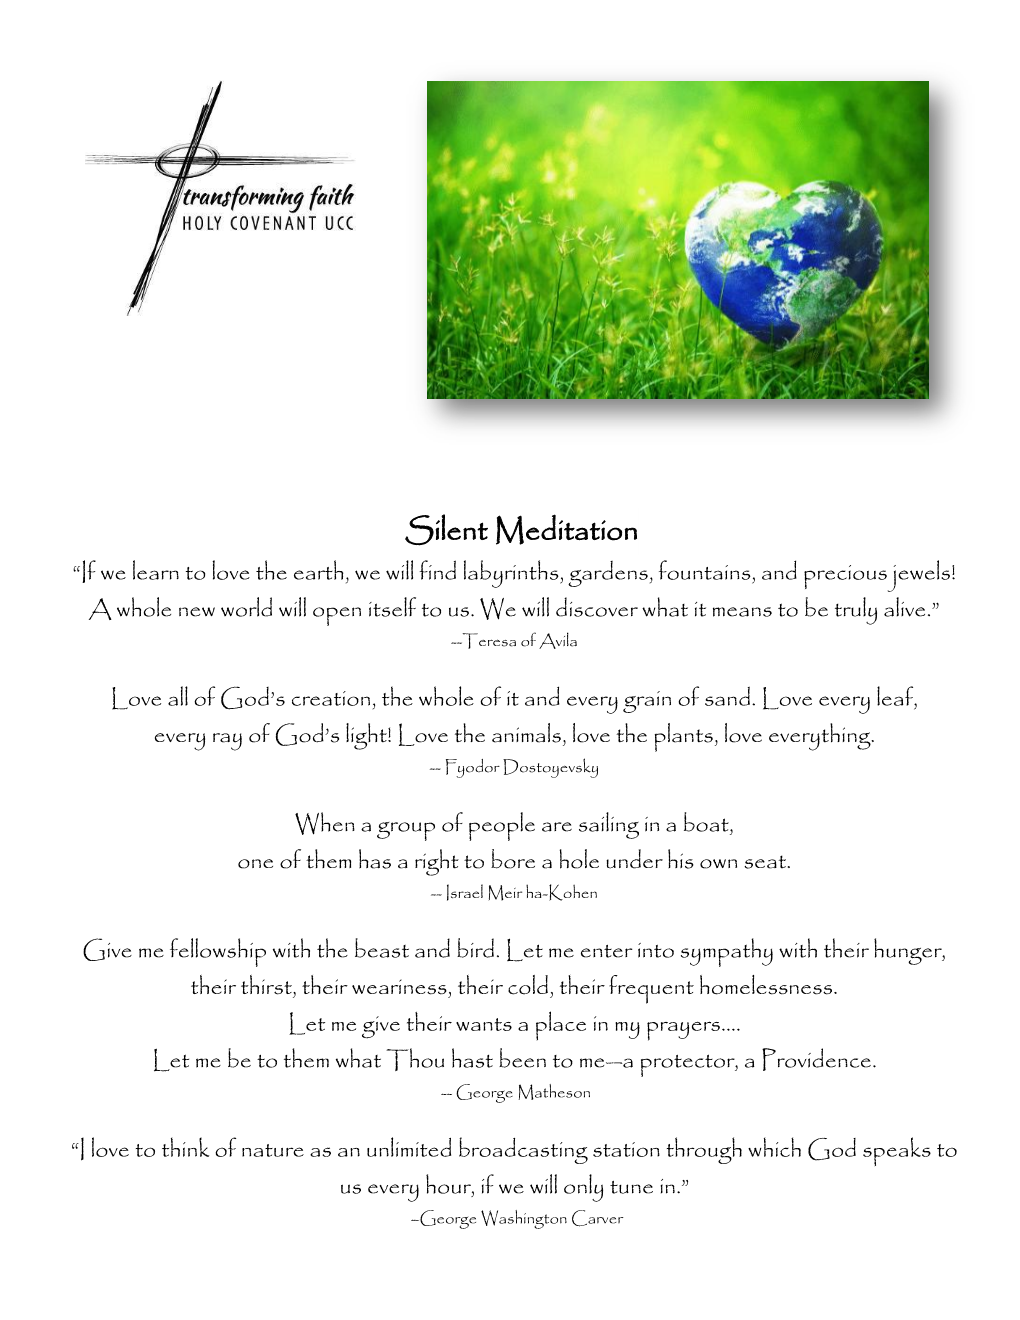 Silent Meditation “If We Learn to Love the Earth, We Will Find Labyrinths, Gardens, Fountains, and Precious Jewels! a Whole New World Will Open Itself to Us